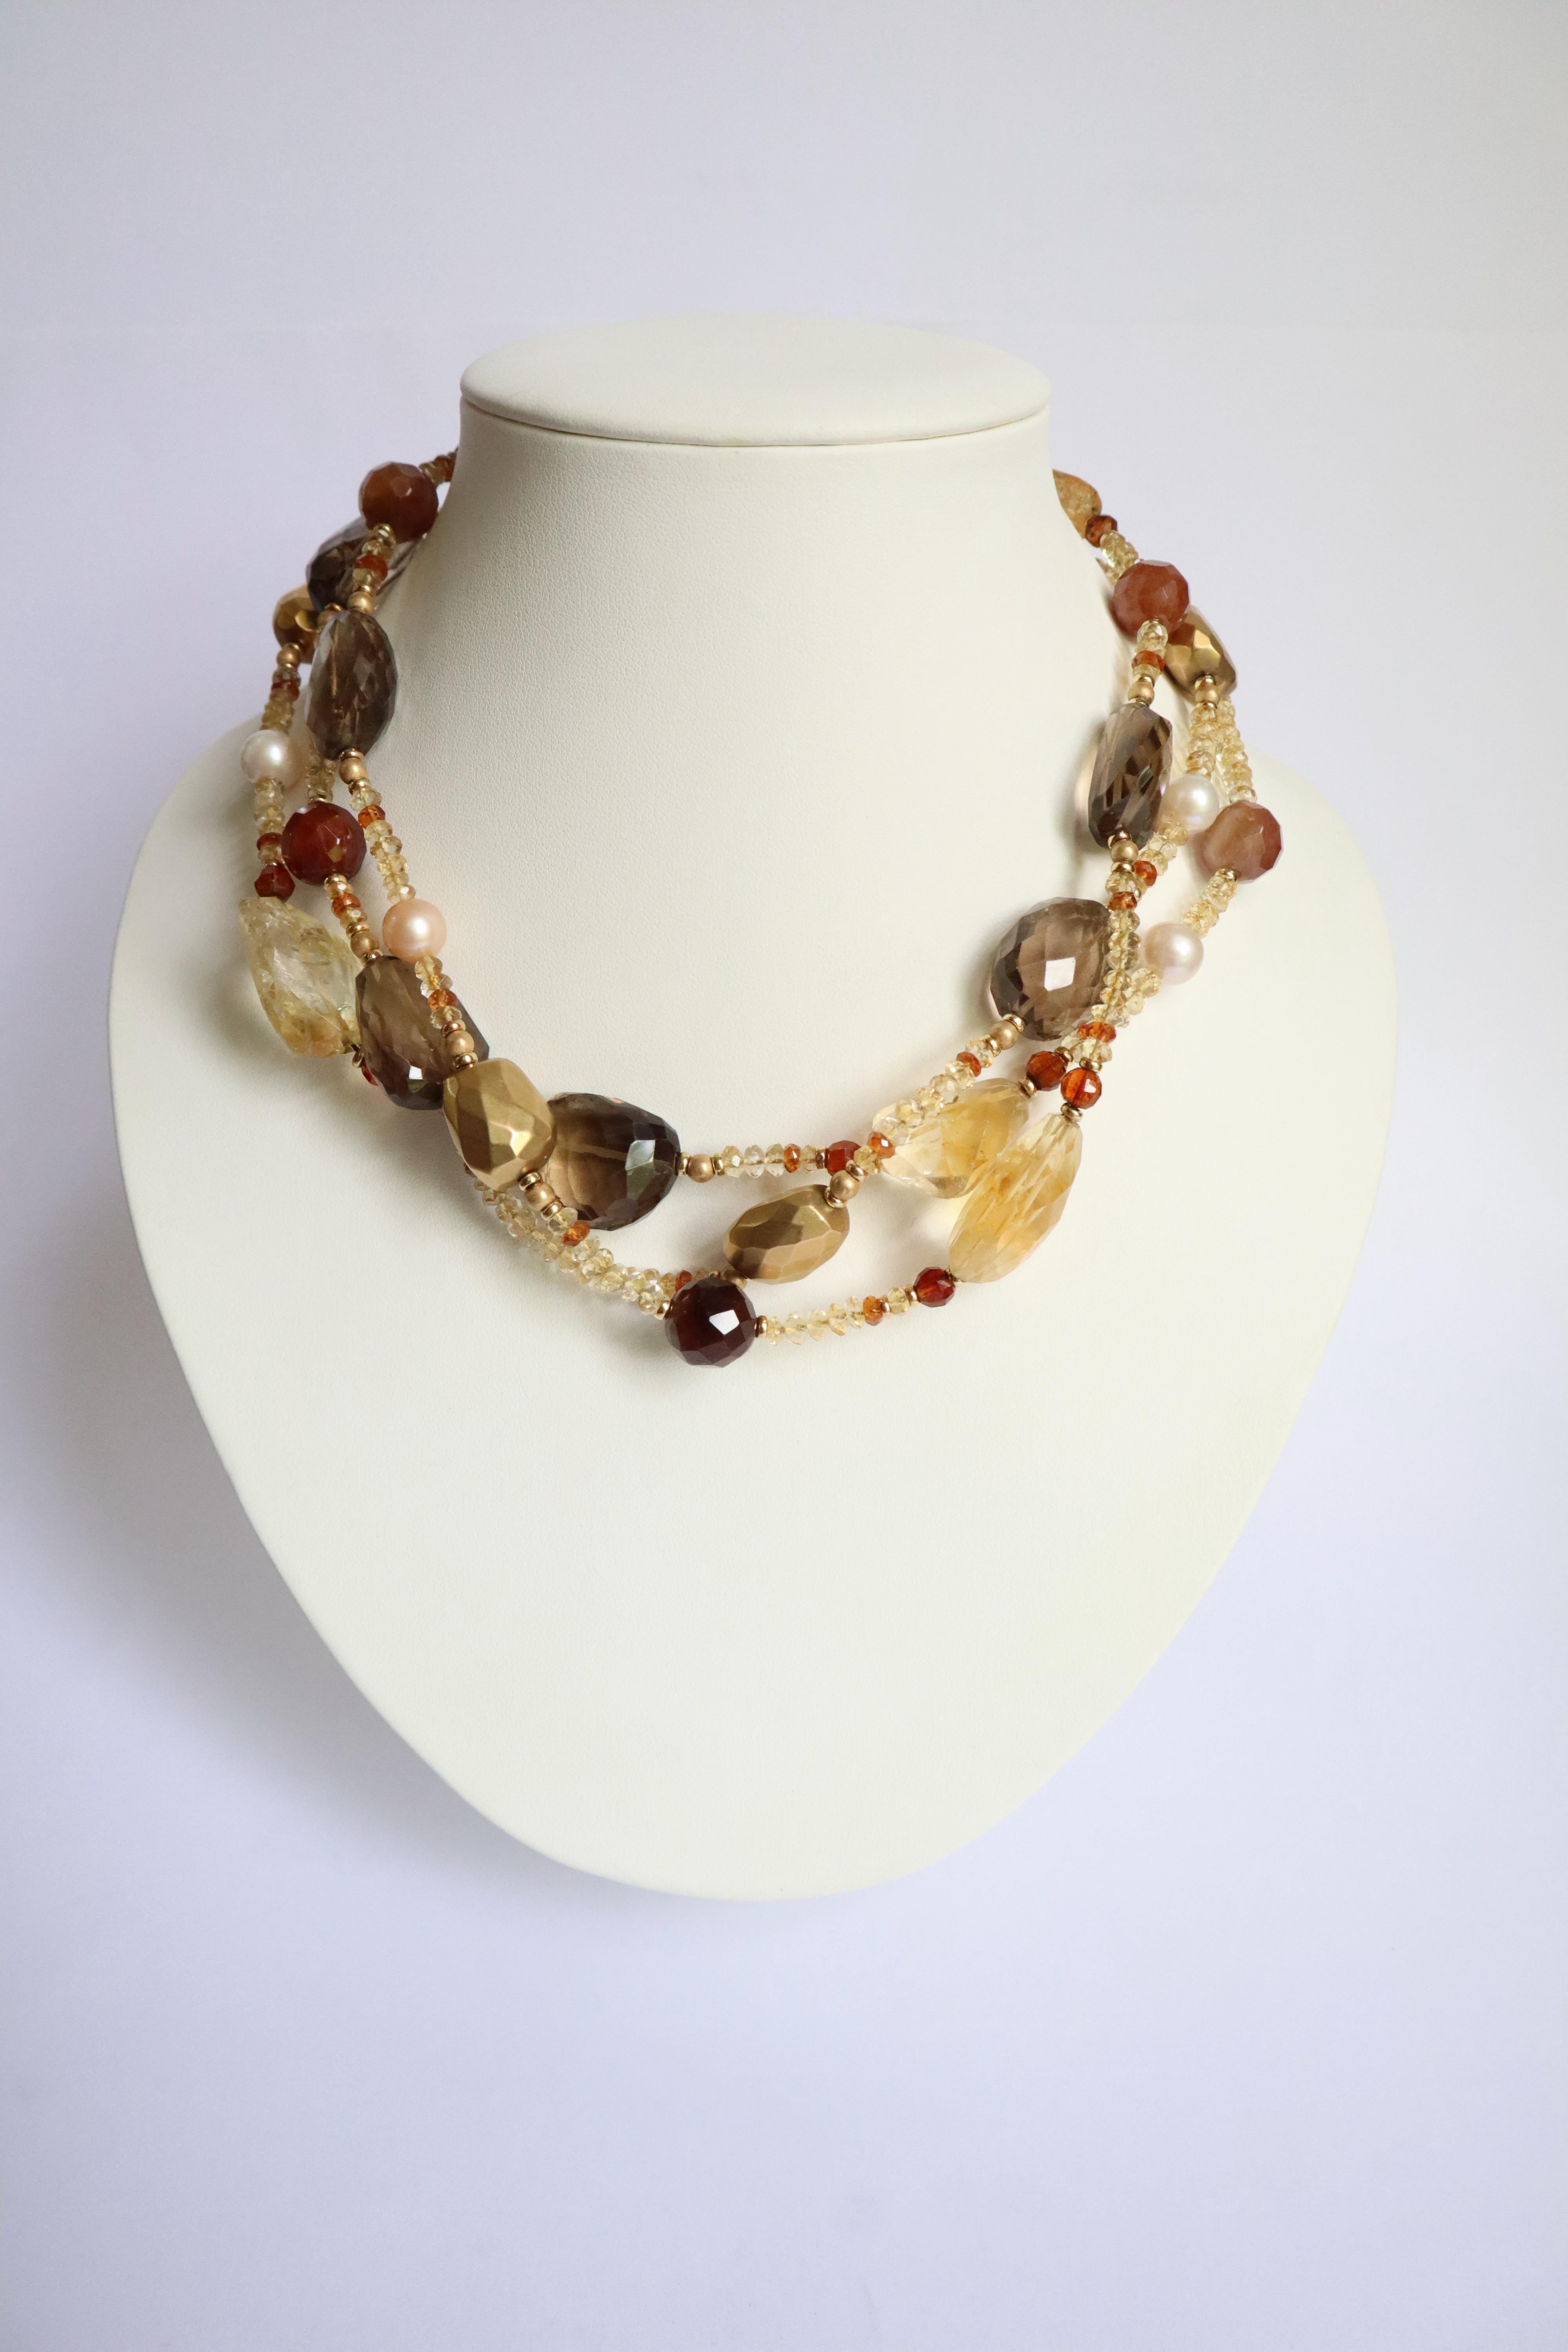 3 row necklace each composed of large faceted smoky quartz and large faceted citrines alternating with large faceted gold balls, pearls, small brushed gold balls, rose quartz, gold ferrule, citrine pearls and quartz. 
18 carats brushed yellow gold